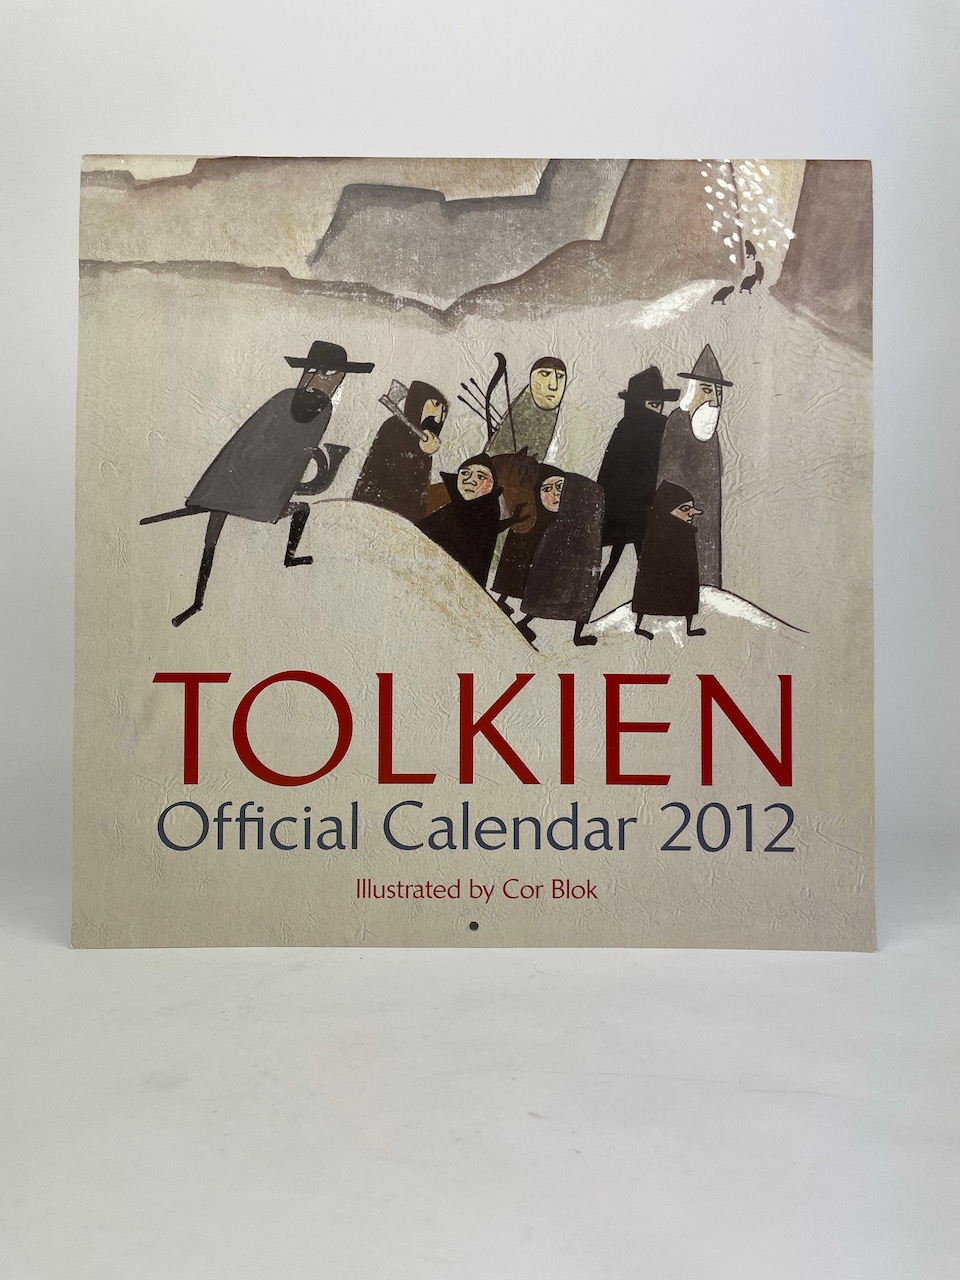 Tolkien Calendar 2012 features 13 paintings by the artist Cor Blok